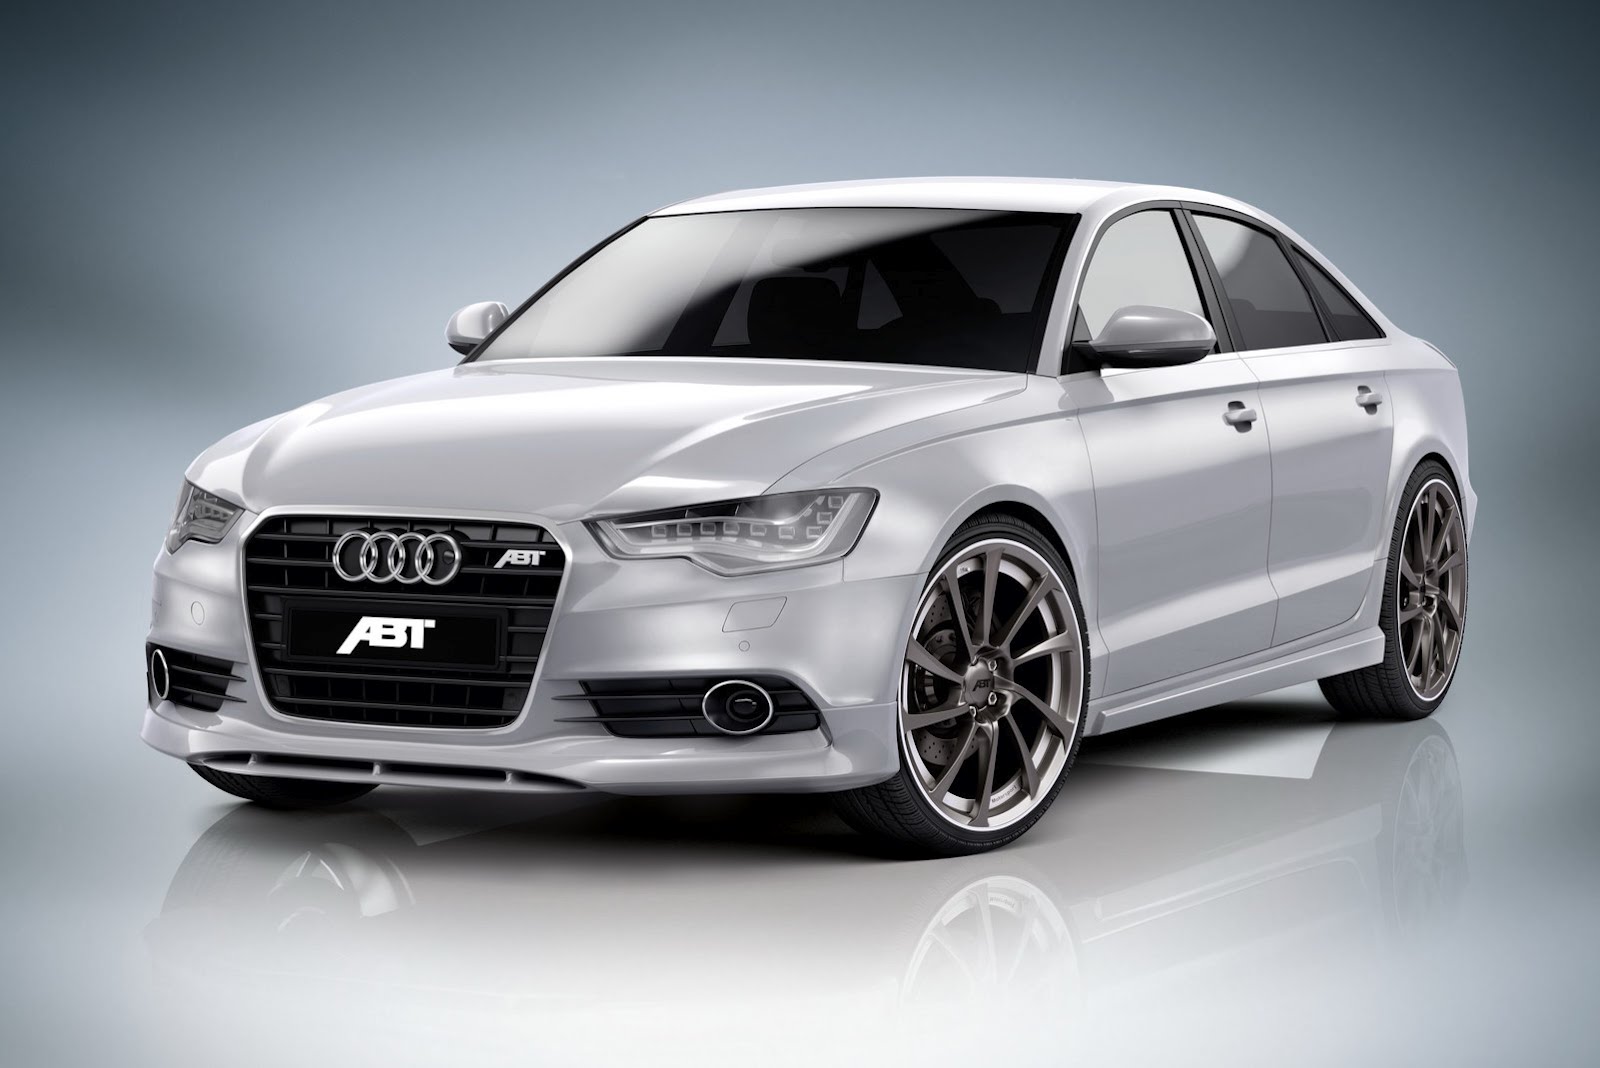 New Audi A6 gets power boost from ABT Sportsline